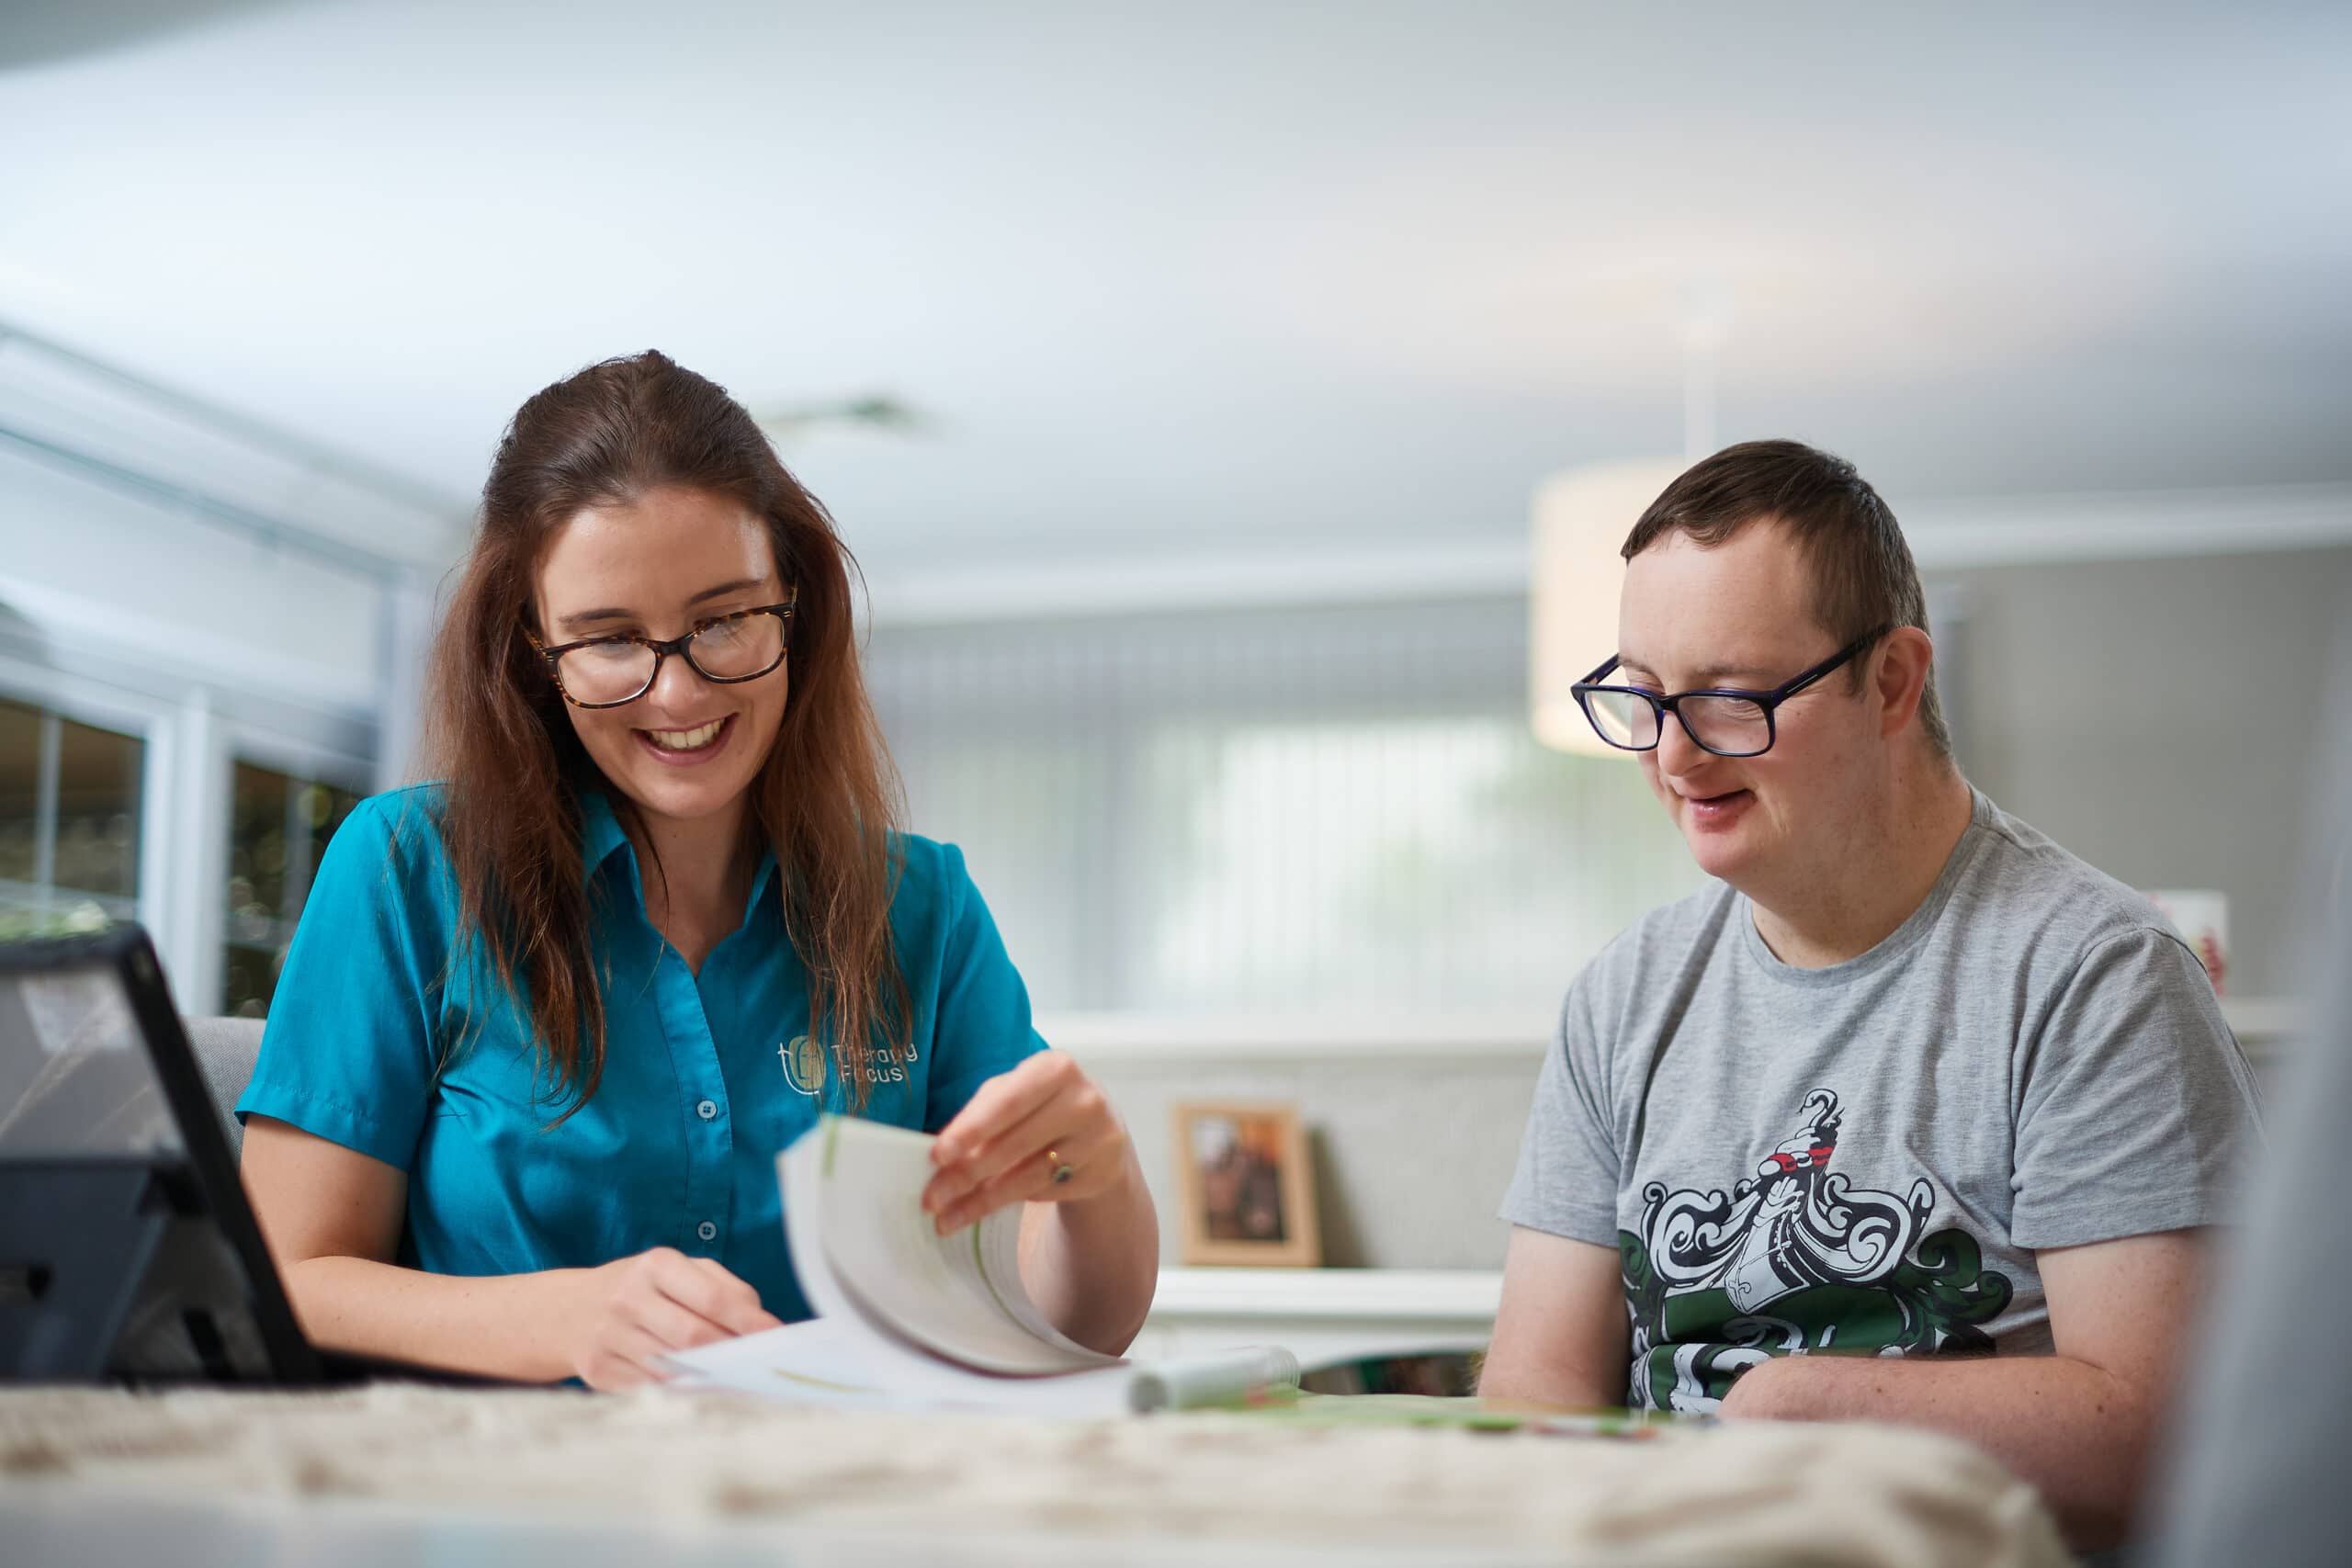 A therapist and young adult sit at a table and examine a booklet. Ther therapist is wearing a blue top and has medium length brown hair. The young adult wears glasses and a grey top. 